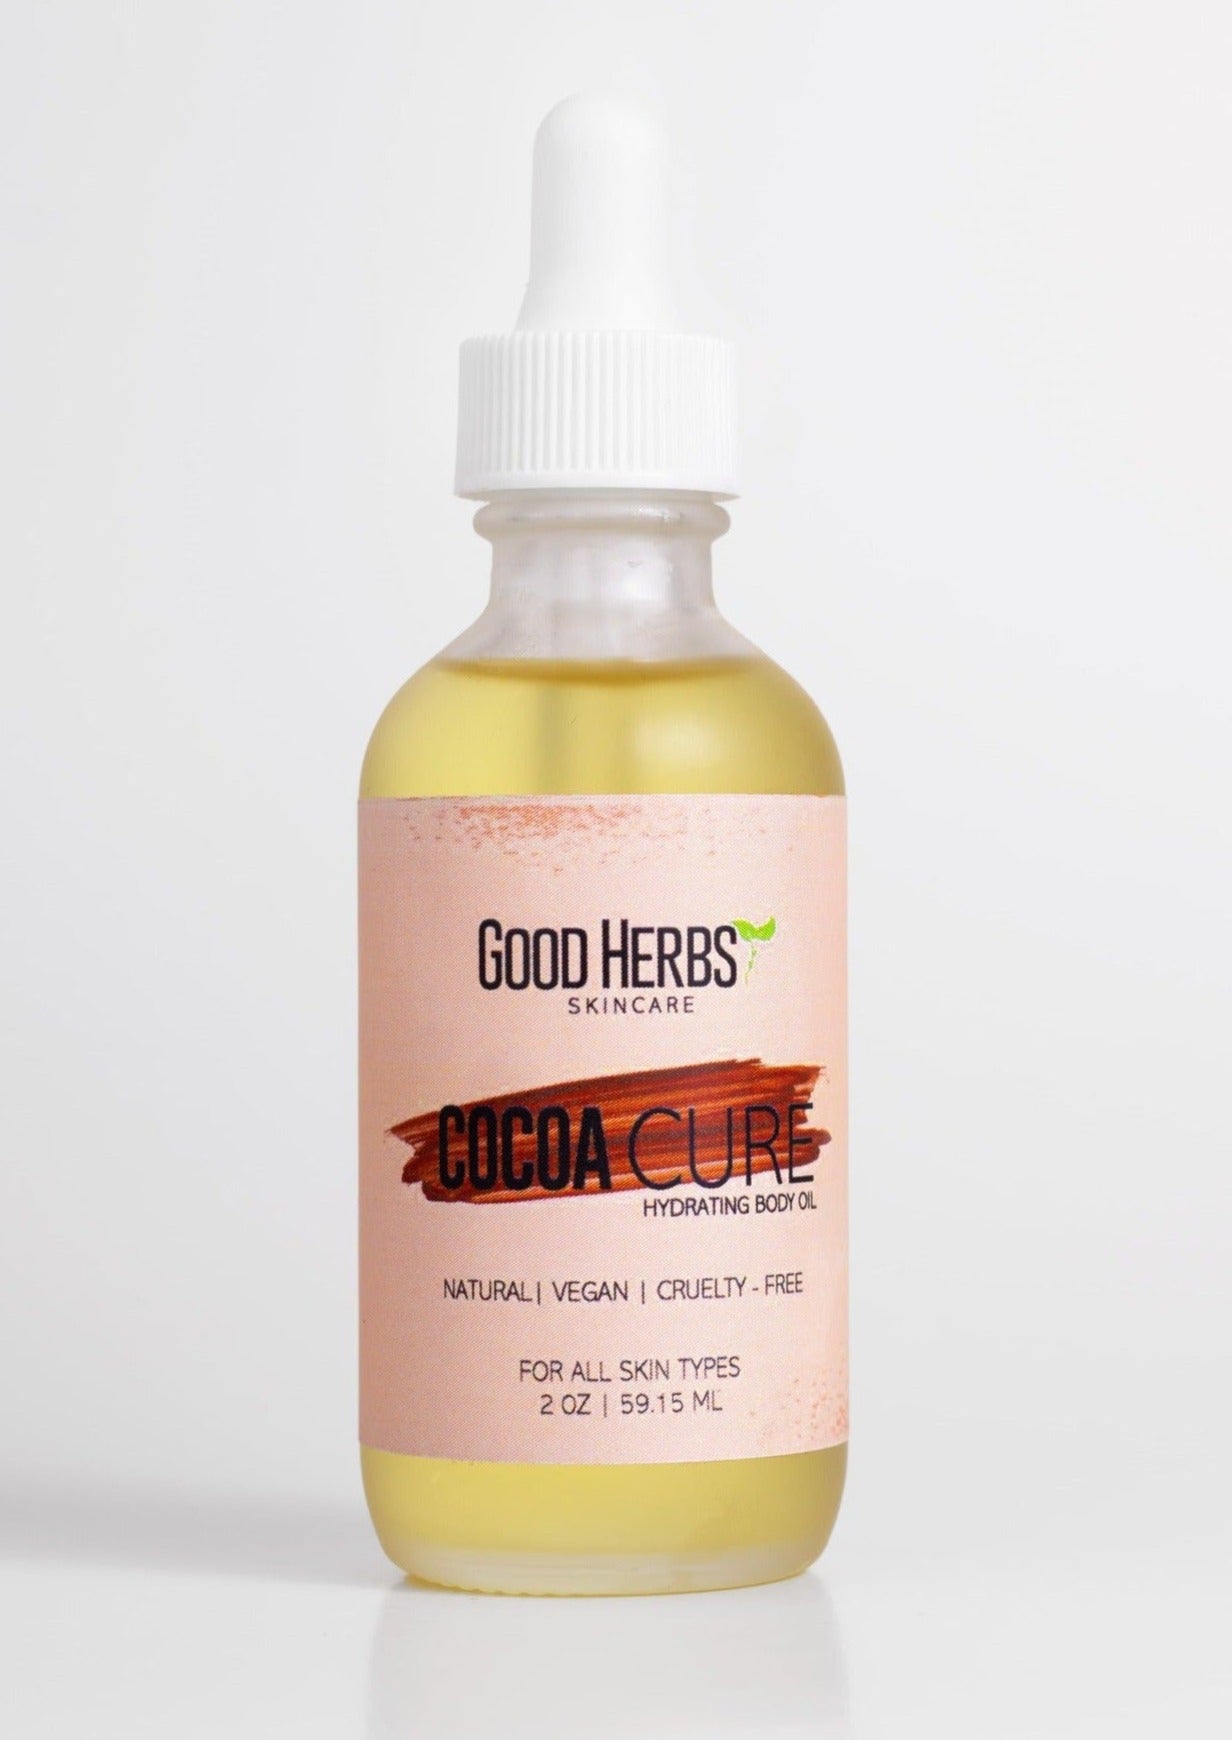 Cocoa Cure Hydrating Body Oil – Good Herbs Skincare